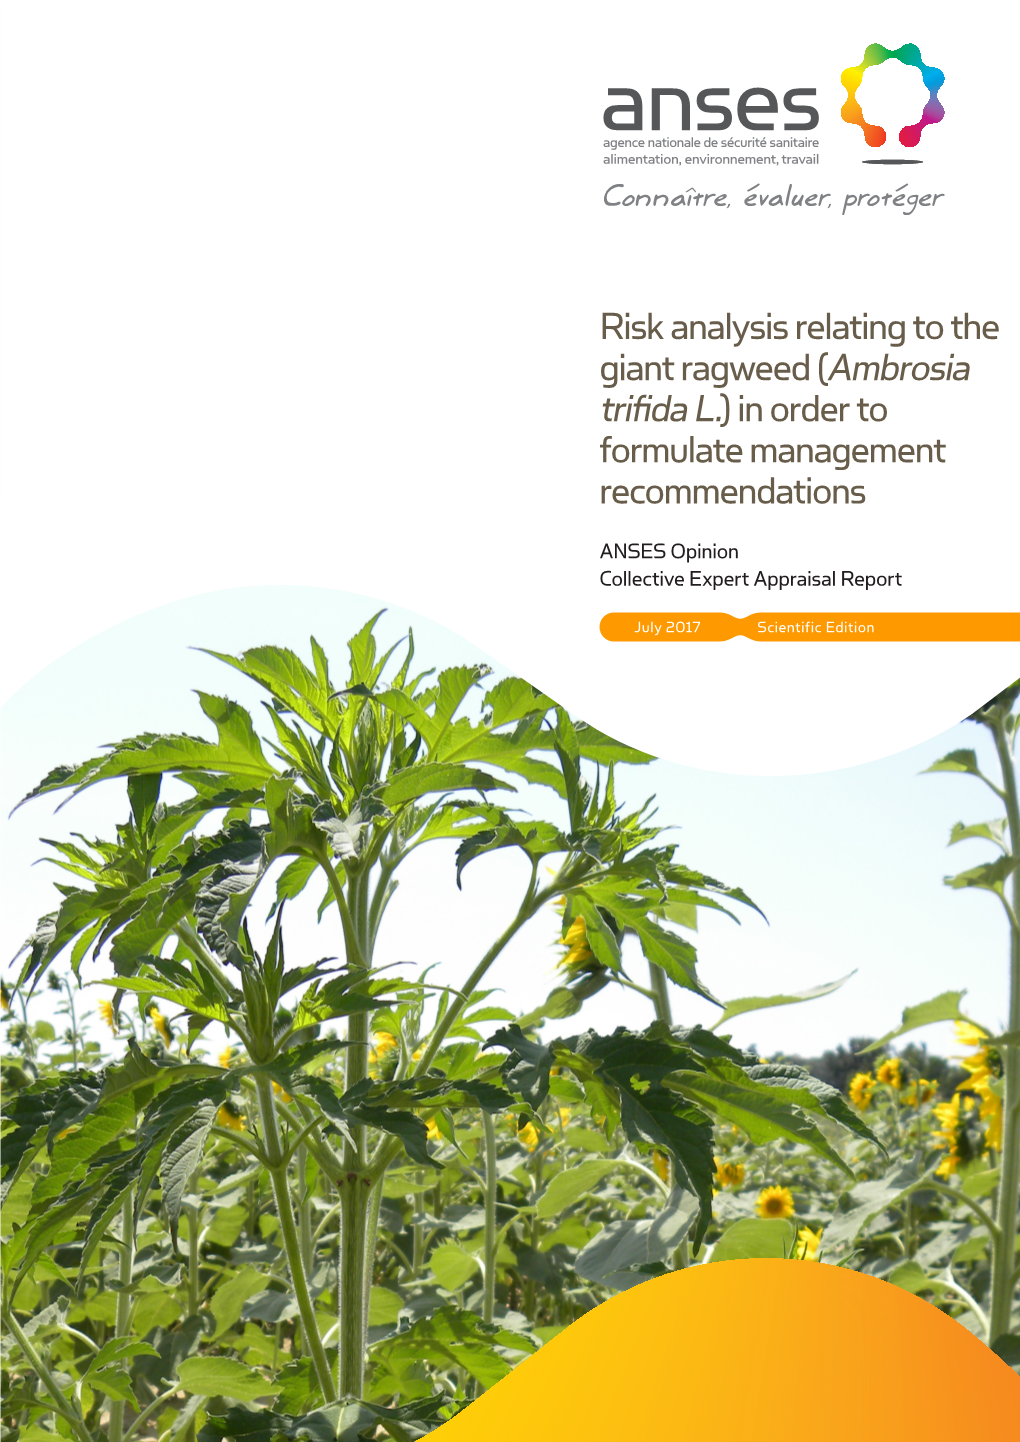 ANSES Opinion and Report on Conducting a Risk